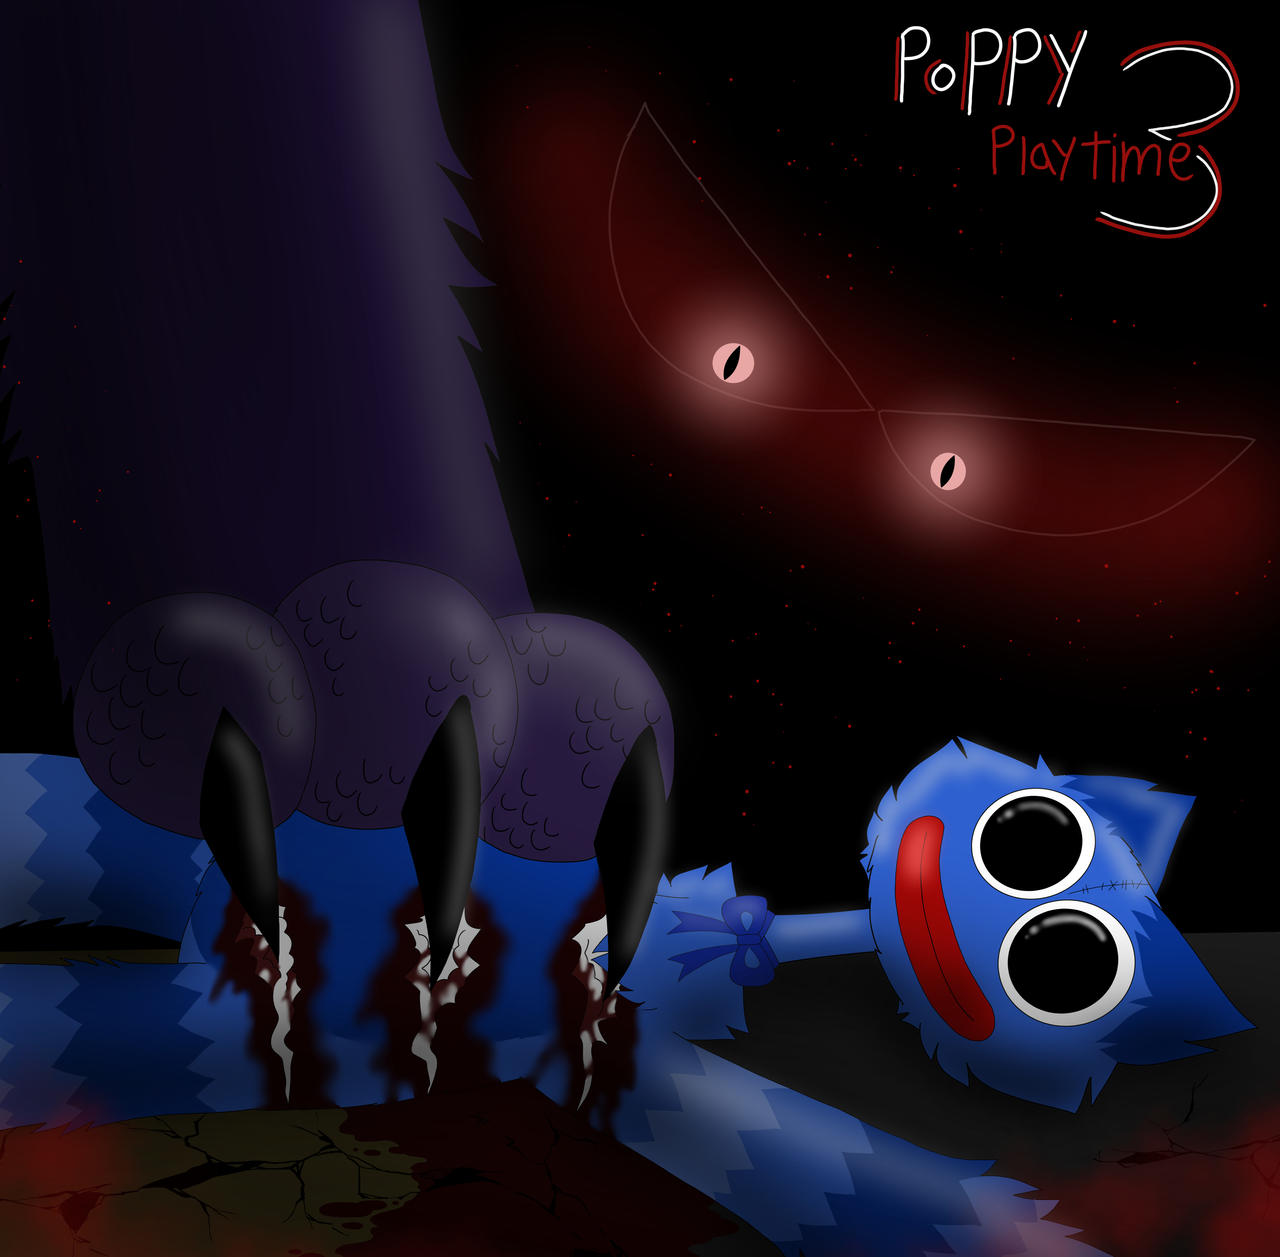 CATNAP IS THE NEW MONSTER IN POPPY PLAYTIME CHAPTER 3 